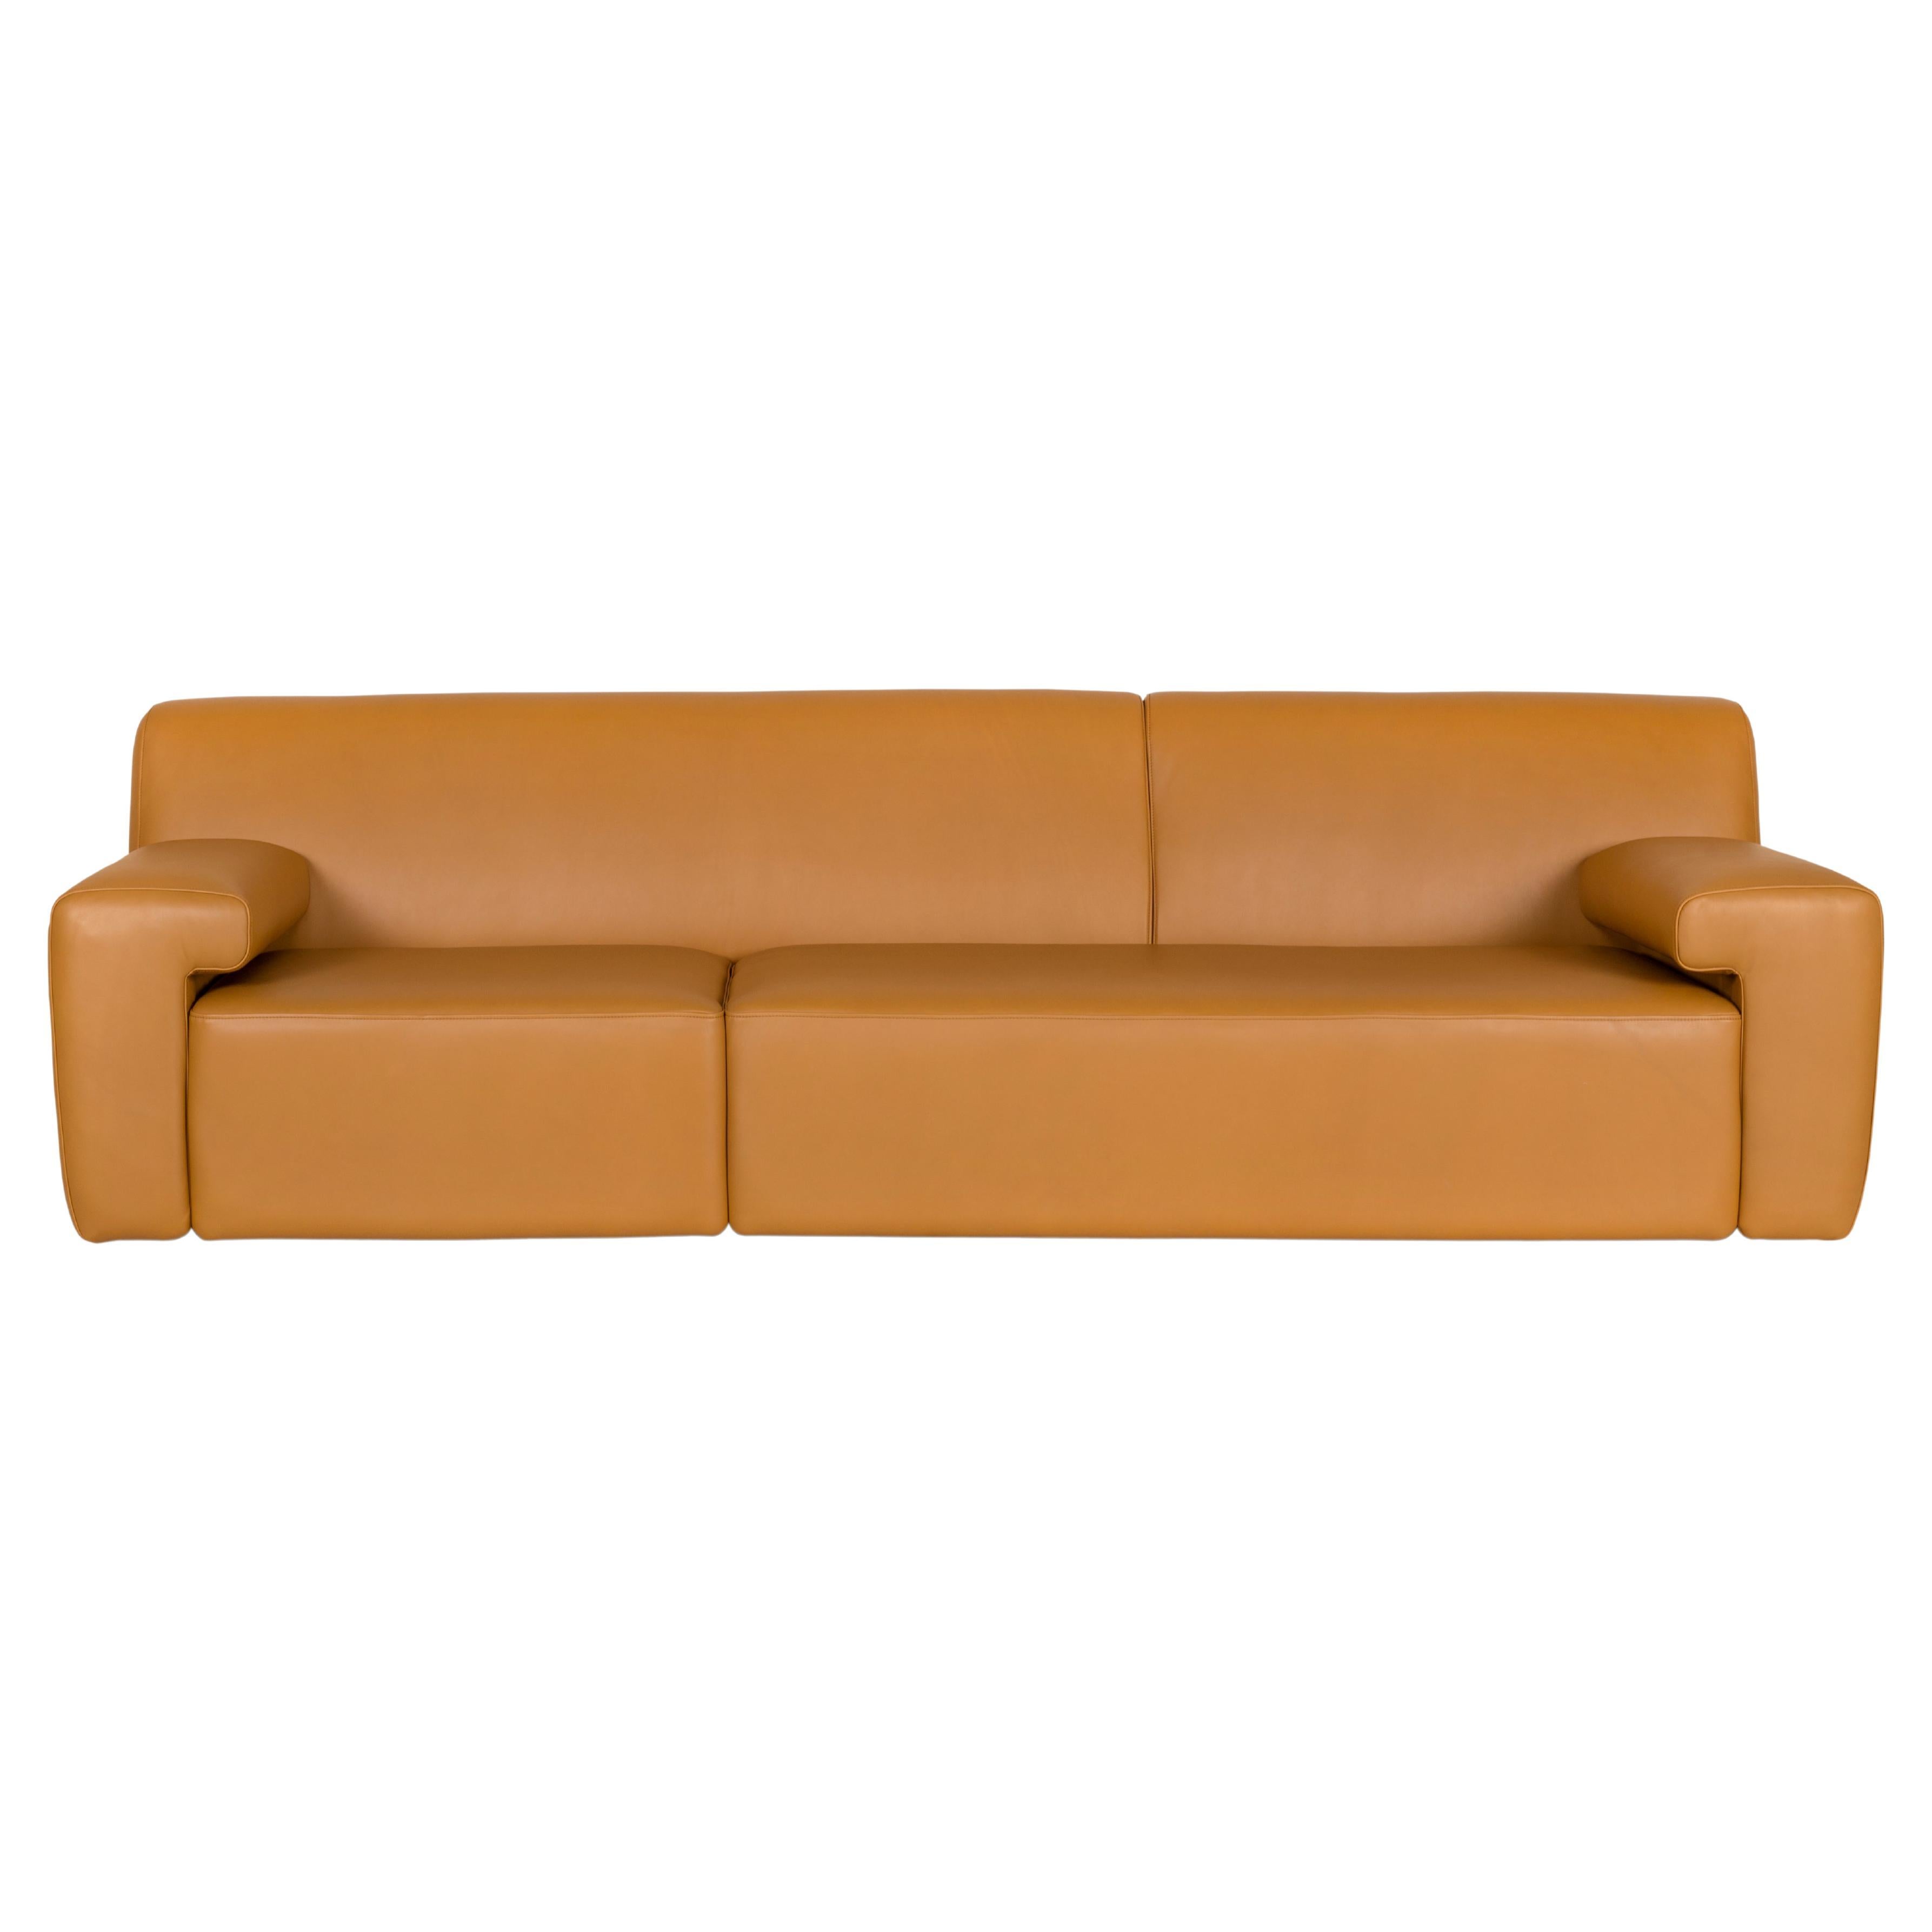 Modern Almourol Sofa, Camel Italian Leather, Handmade in Portugal by Greenapple For Sale